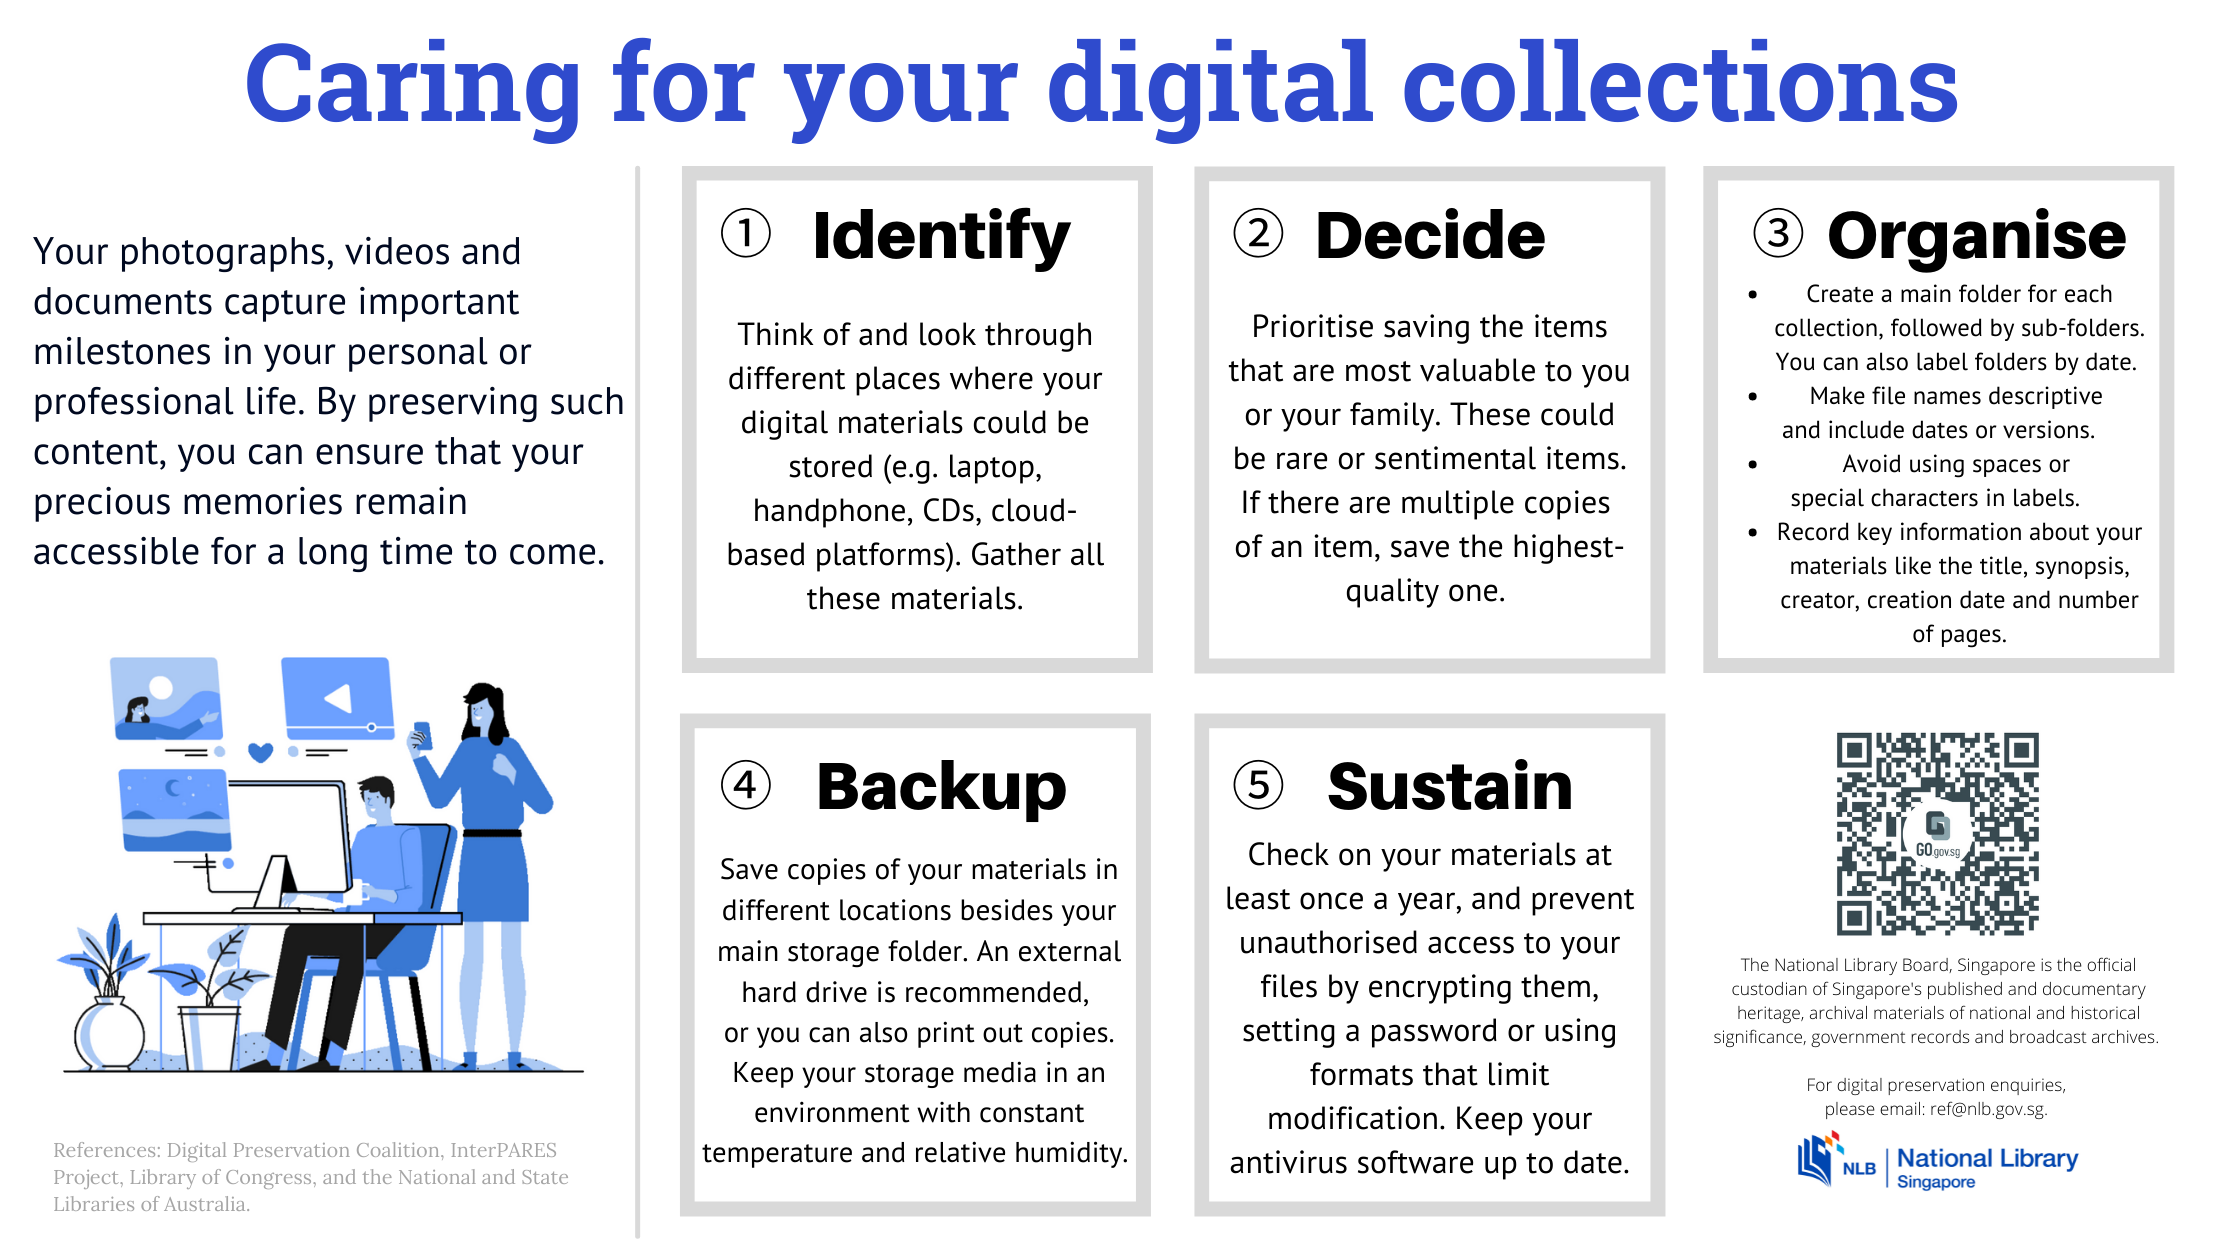 Caring for your digital collections infographic